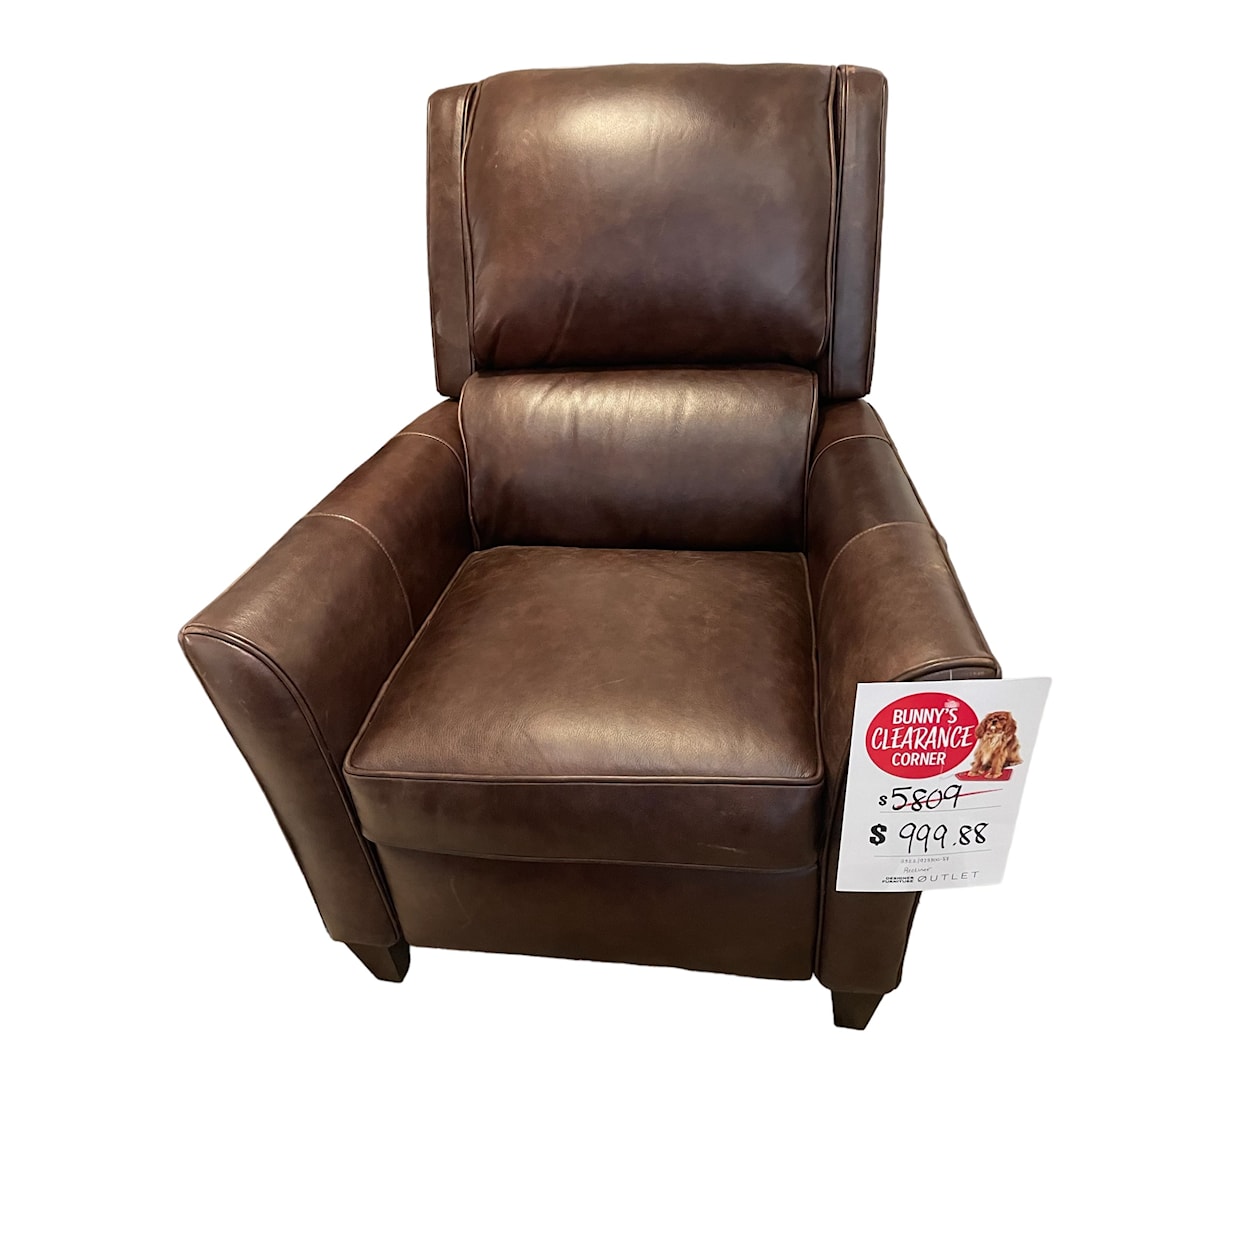 Hooker Furniture Roswell Roswell Recliner